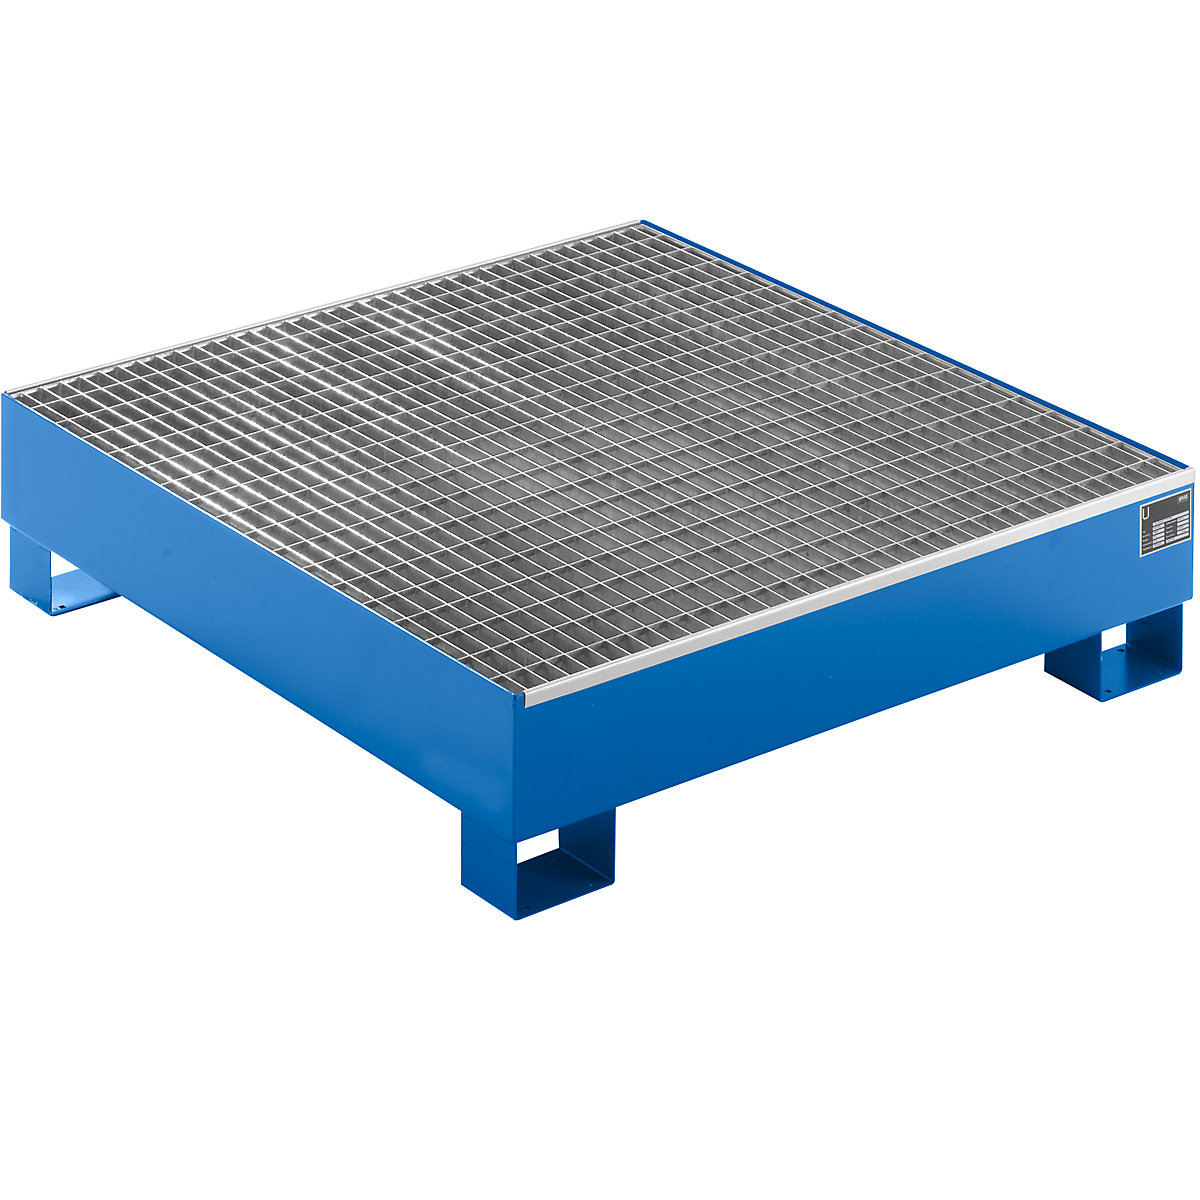 EUROKRAFTbasic – Sump tray made from sheet steel, LxWxH 1200 x 1200 x 285 mm, blue RAL 5012, with grate